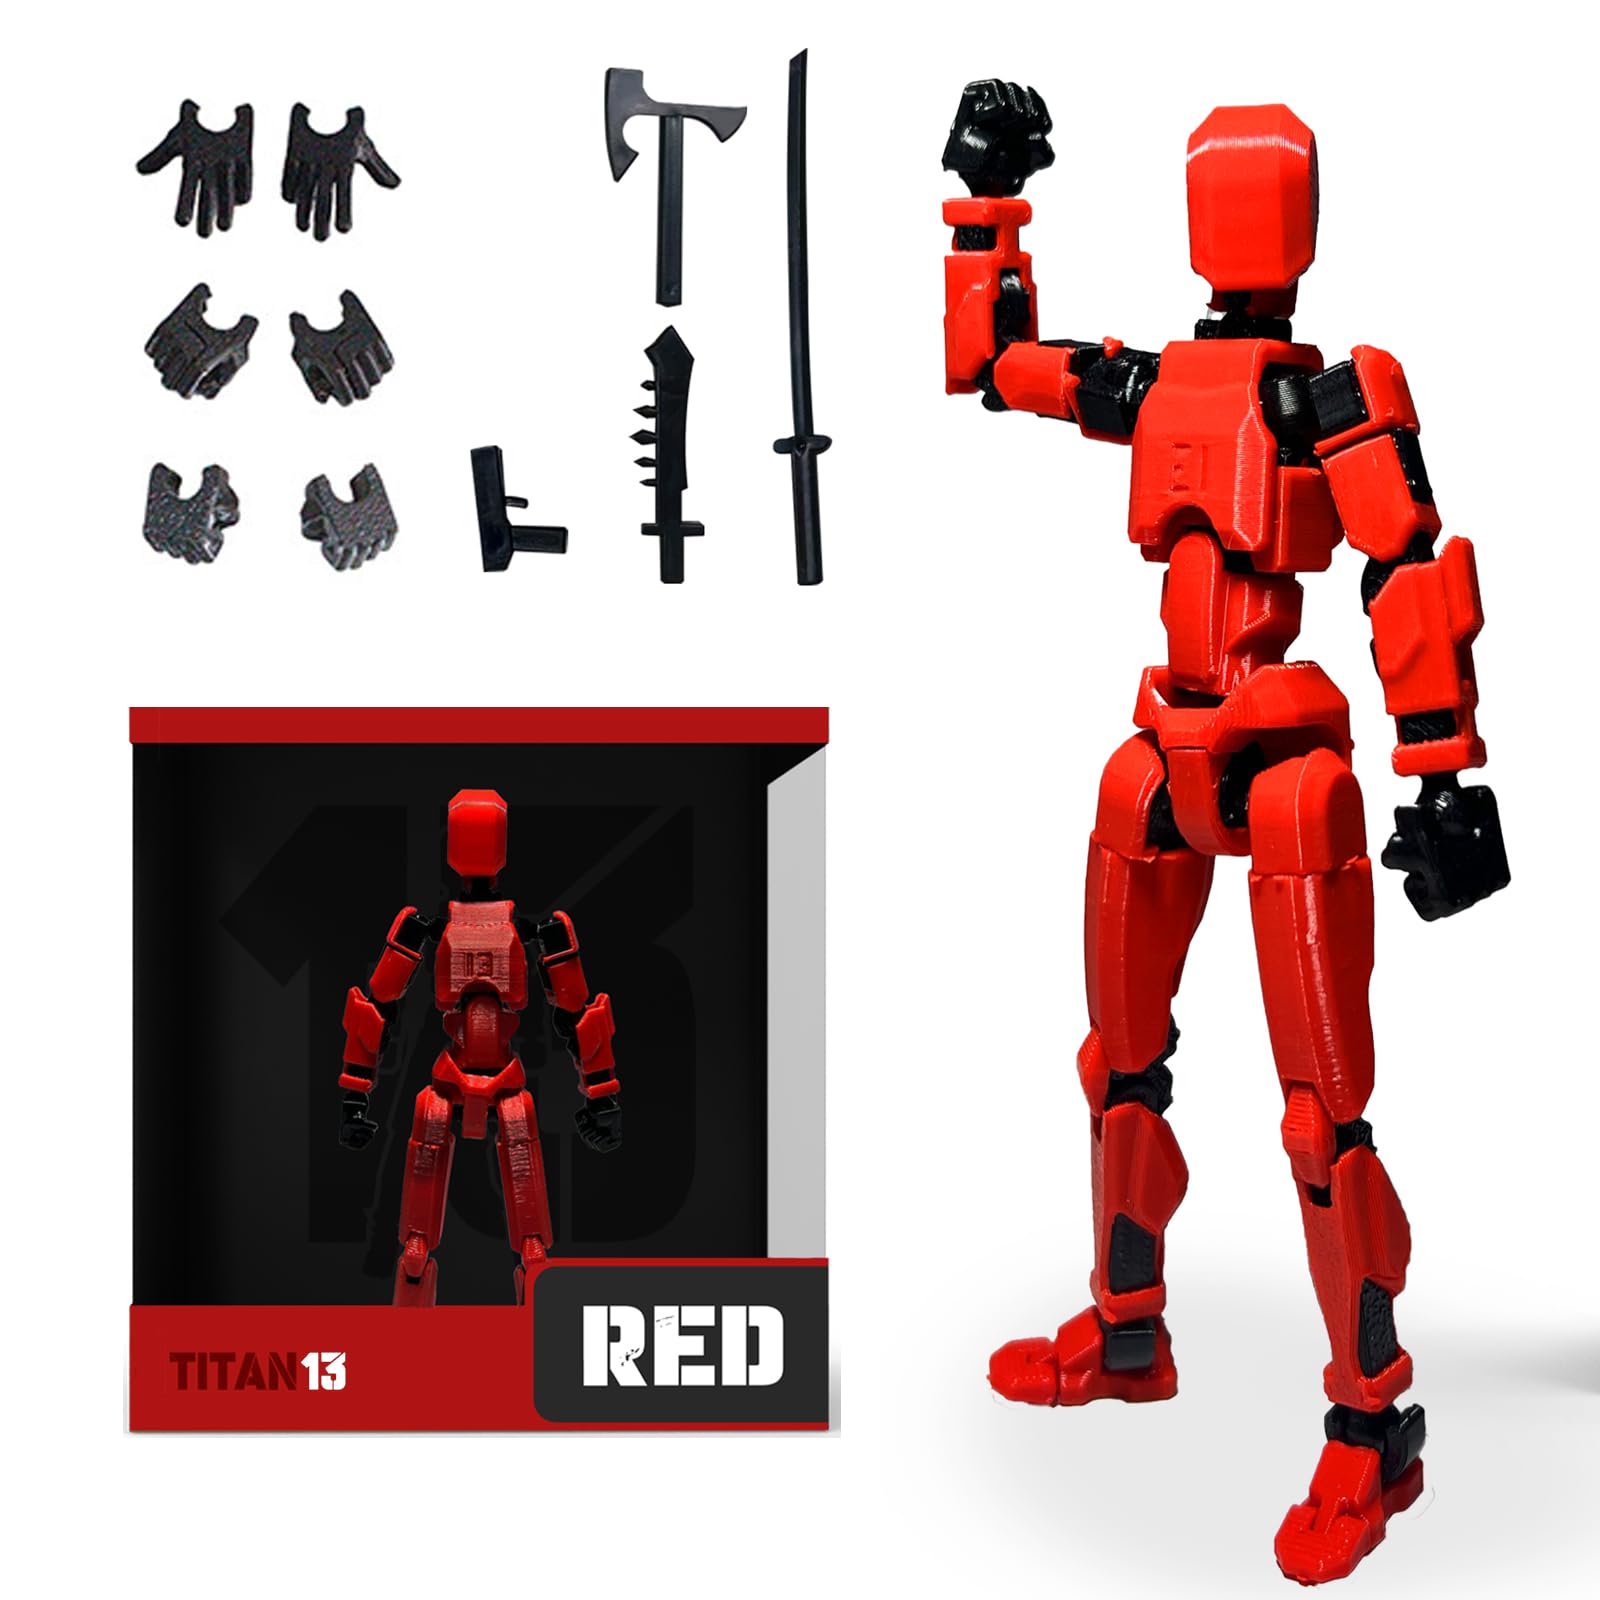 Ailevant Titan 13 Action Figure, T13 Action Figure 3D Printed Multi-Jointed Movable, Lucky 13 Action Figure Nova 13 Action Figure Dummy 13 Action Figure, Valentines Gifts for Him (Red)